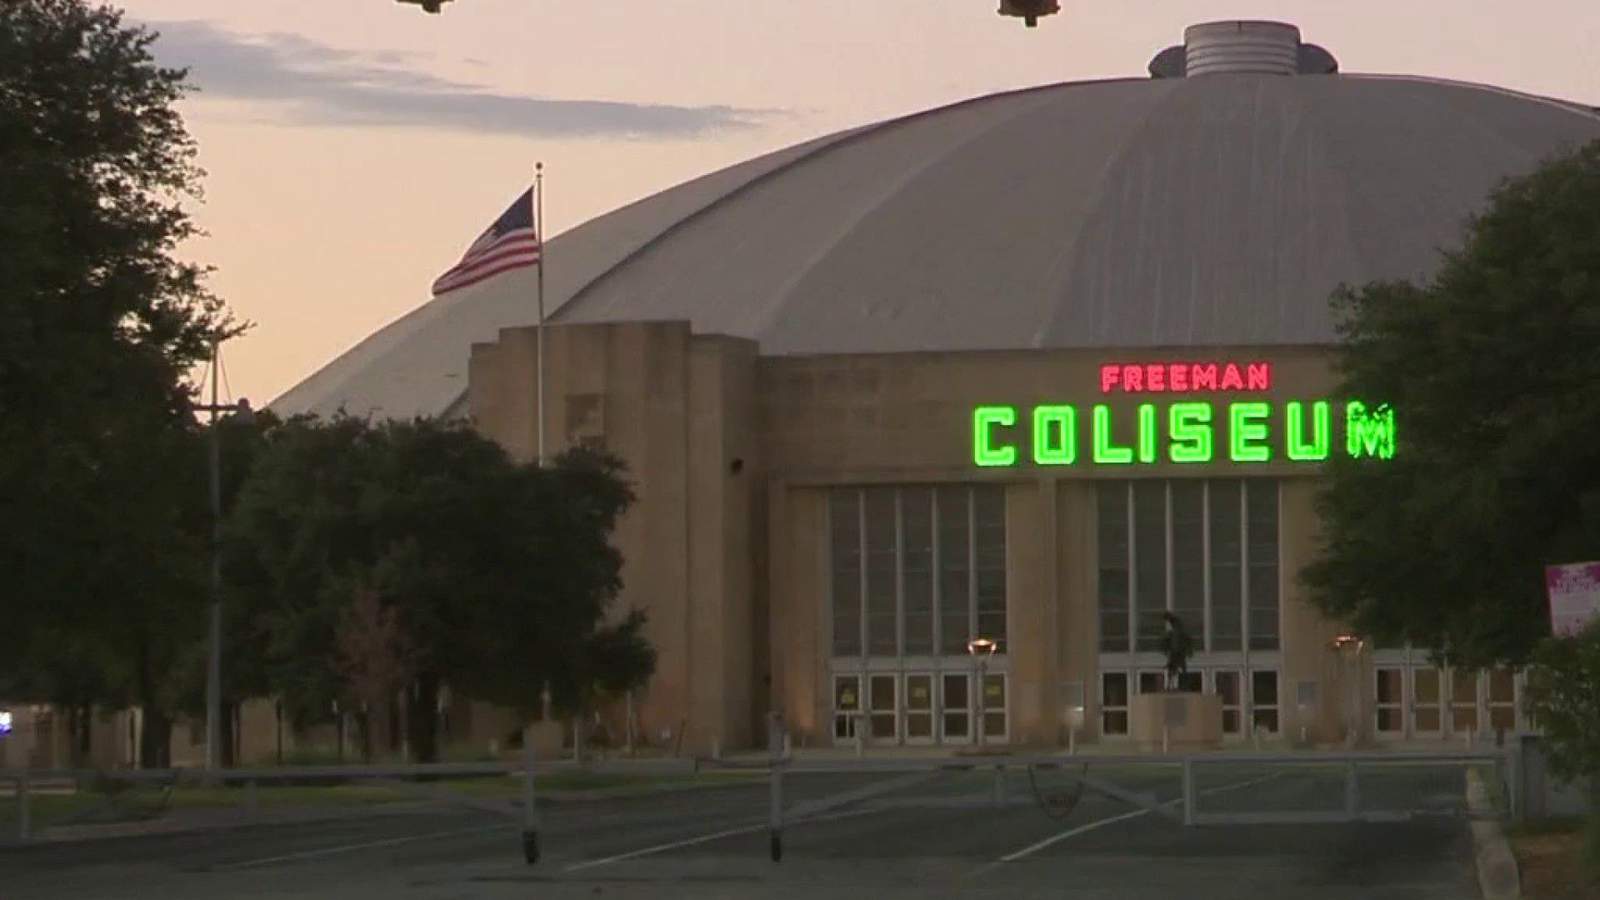 Up to 2,400 migrant children will be temporarily housed at Freeman Coliseum, county leaders say